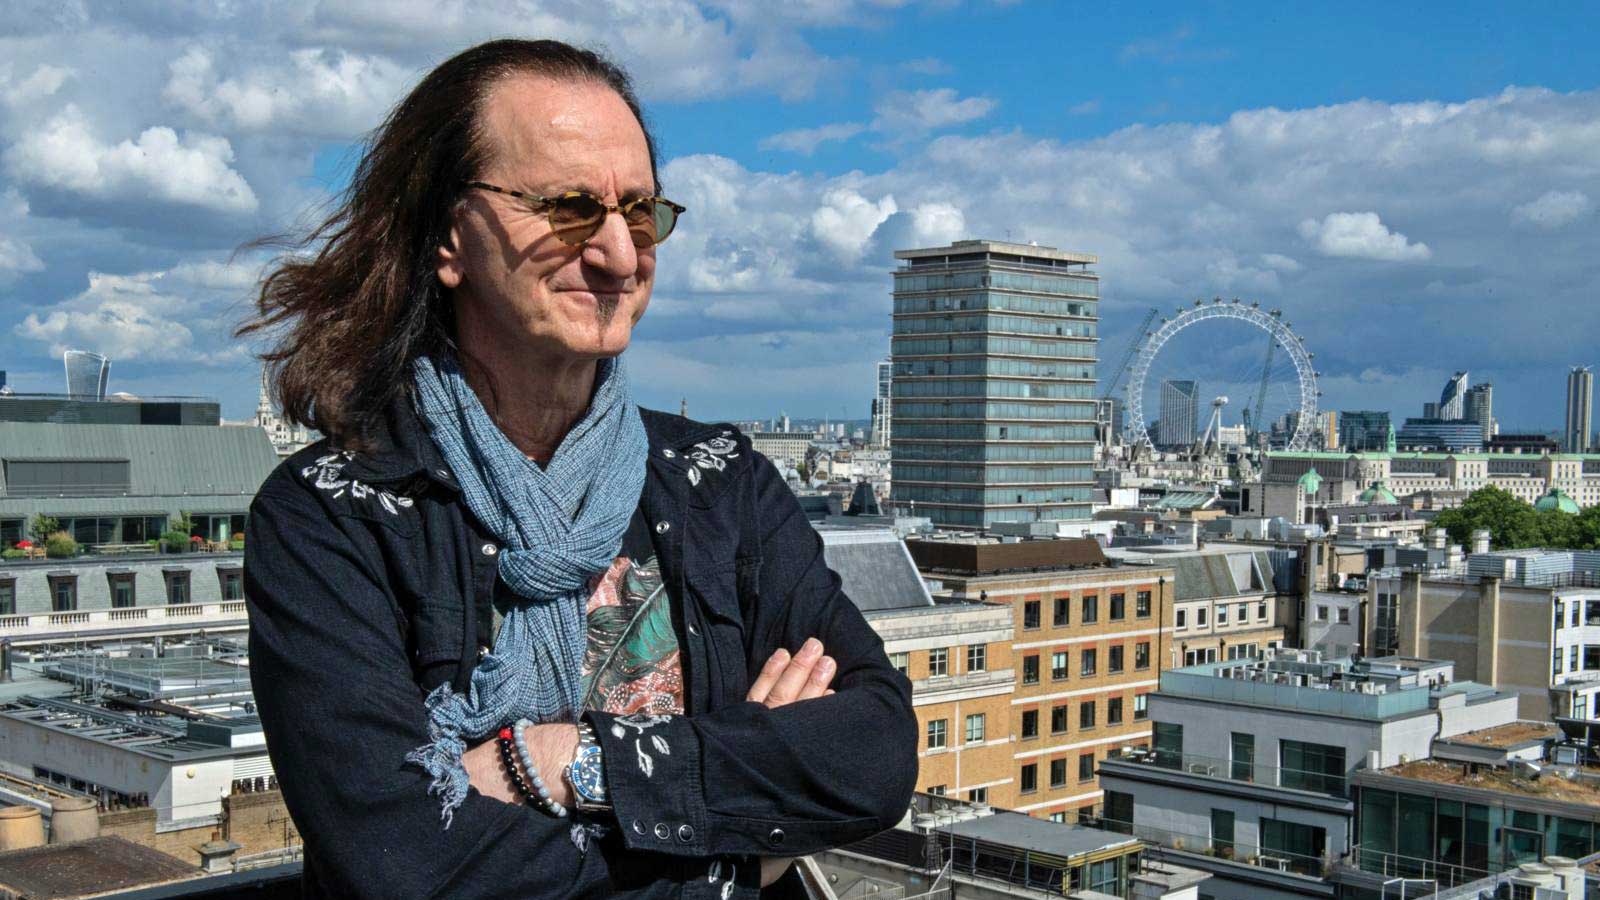 “I said, ‘I’m glad the music meant something to you,’ and she burst into tears!”: On the road with Rush’s Geddy Lee